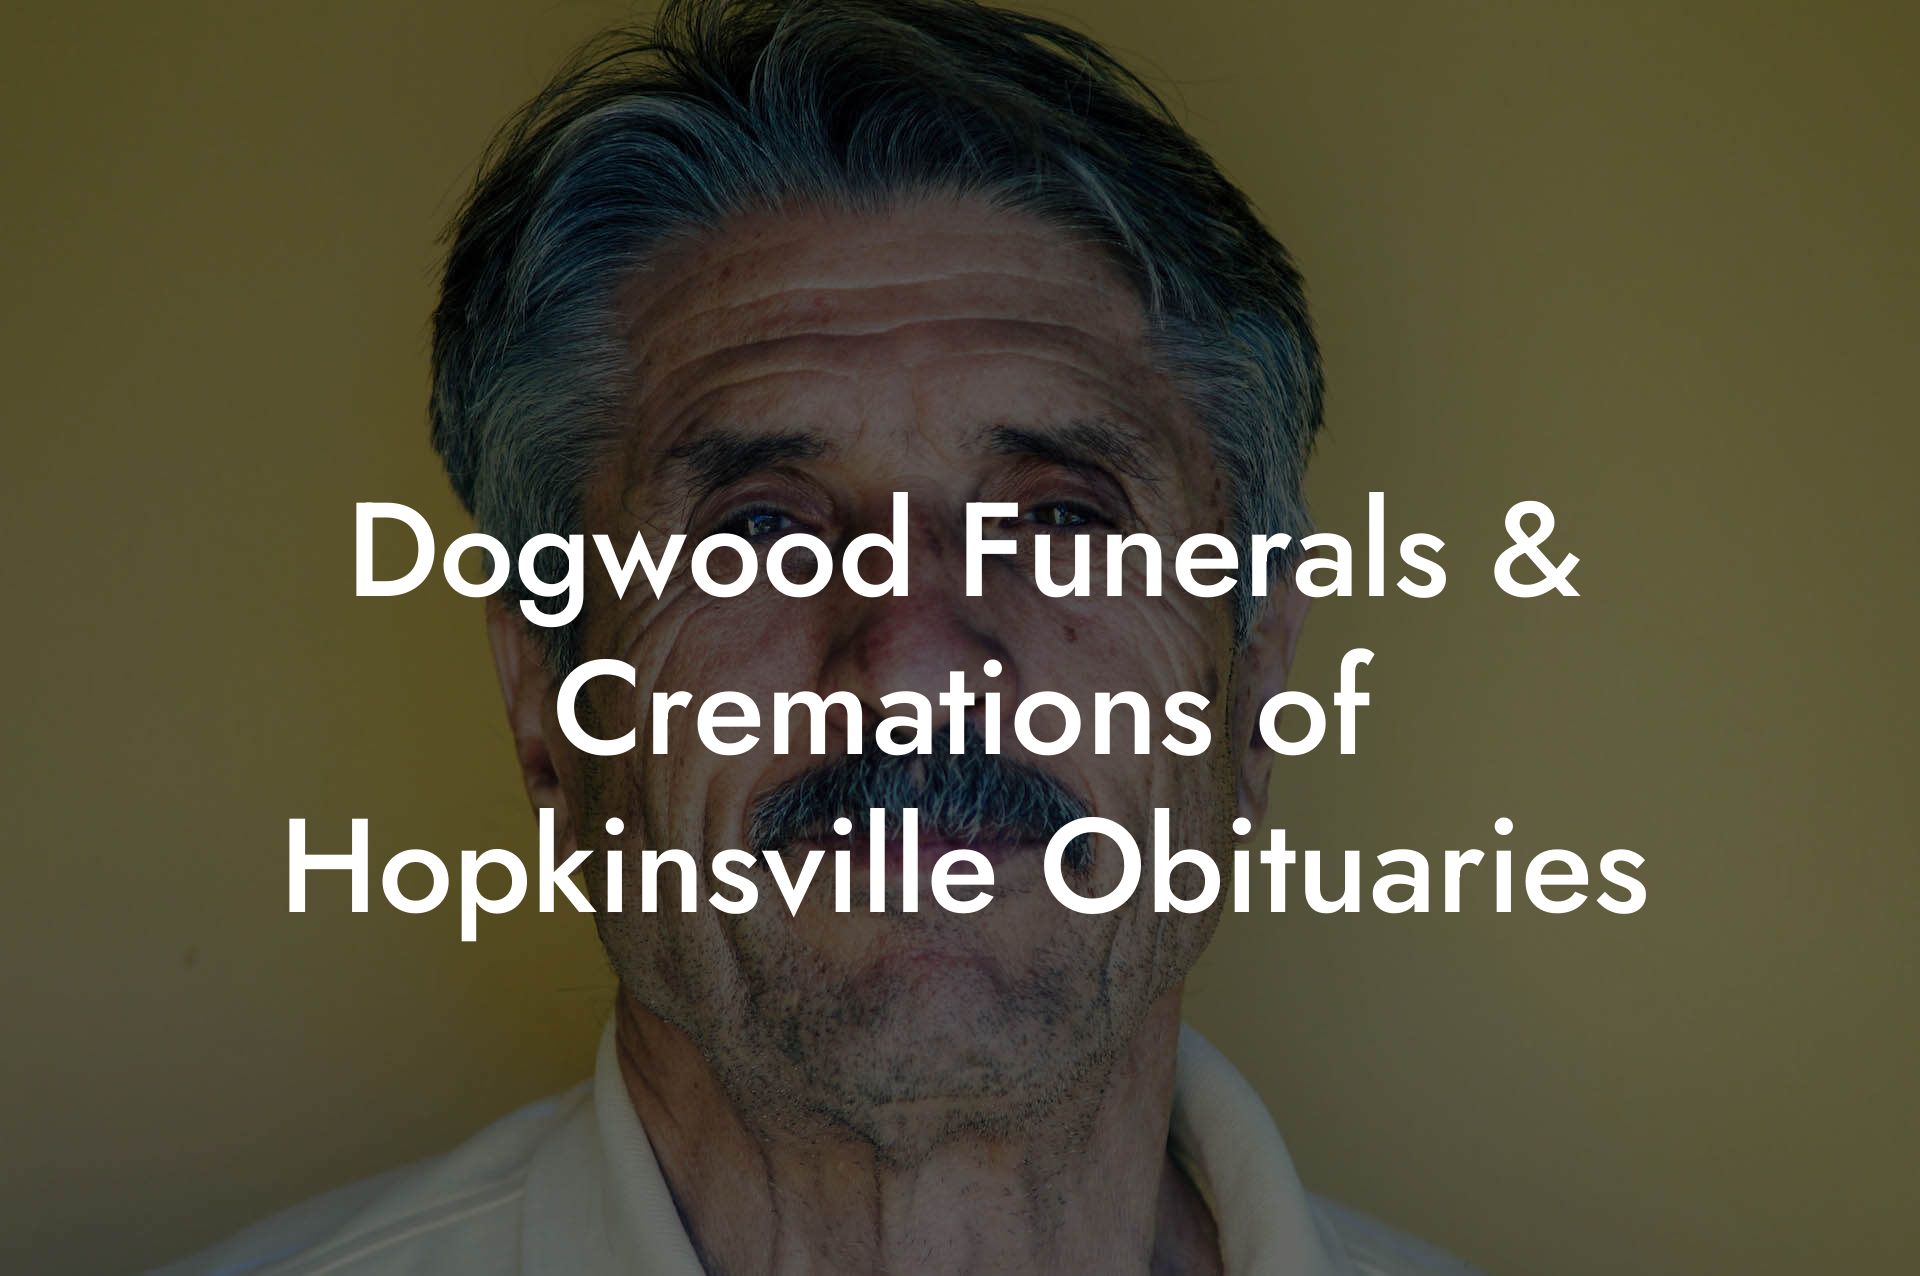 Dogwood Funerals & Cremations of Hopkinsville Obituaries